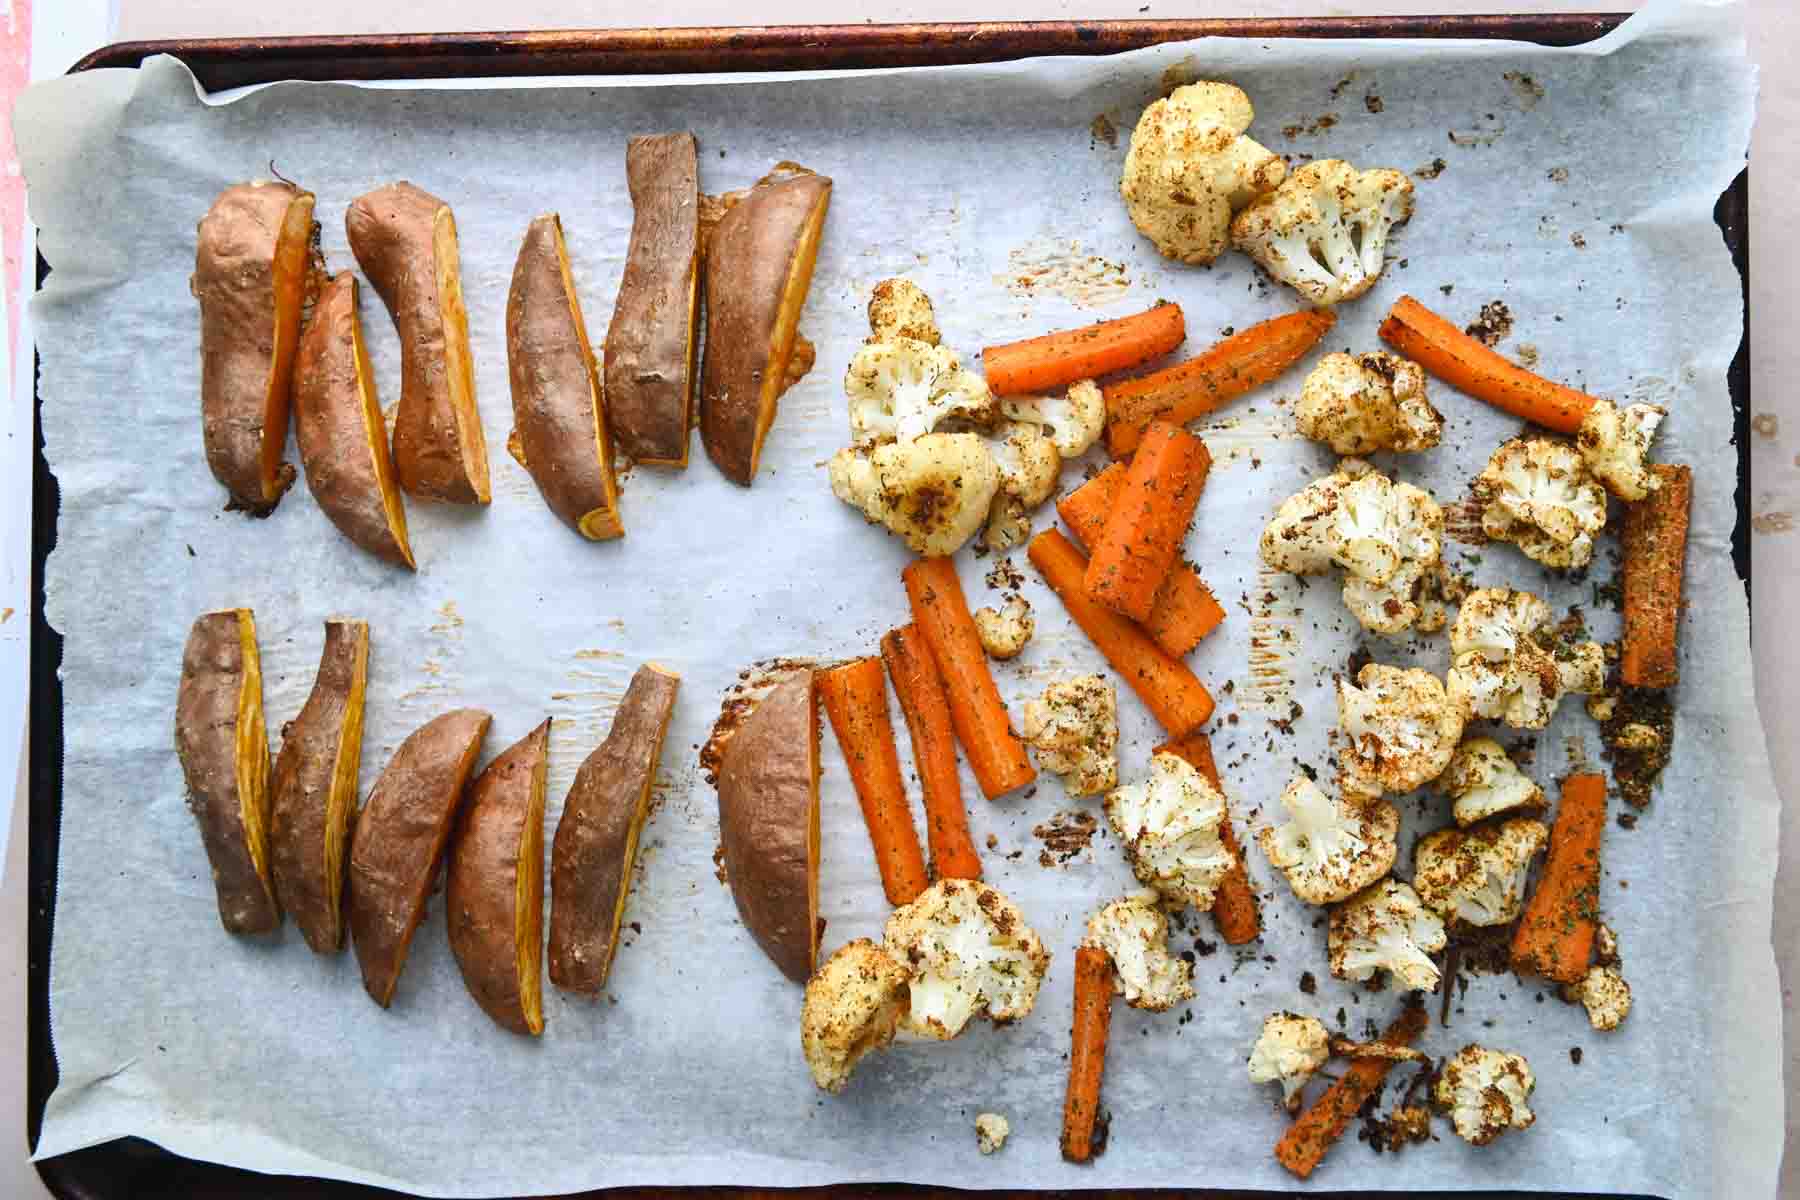 Wedges of sweet potatoes, cauliflower, and carrots on a parchment paper lined sheet pan.